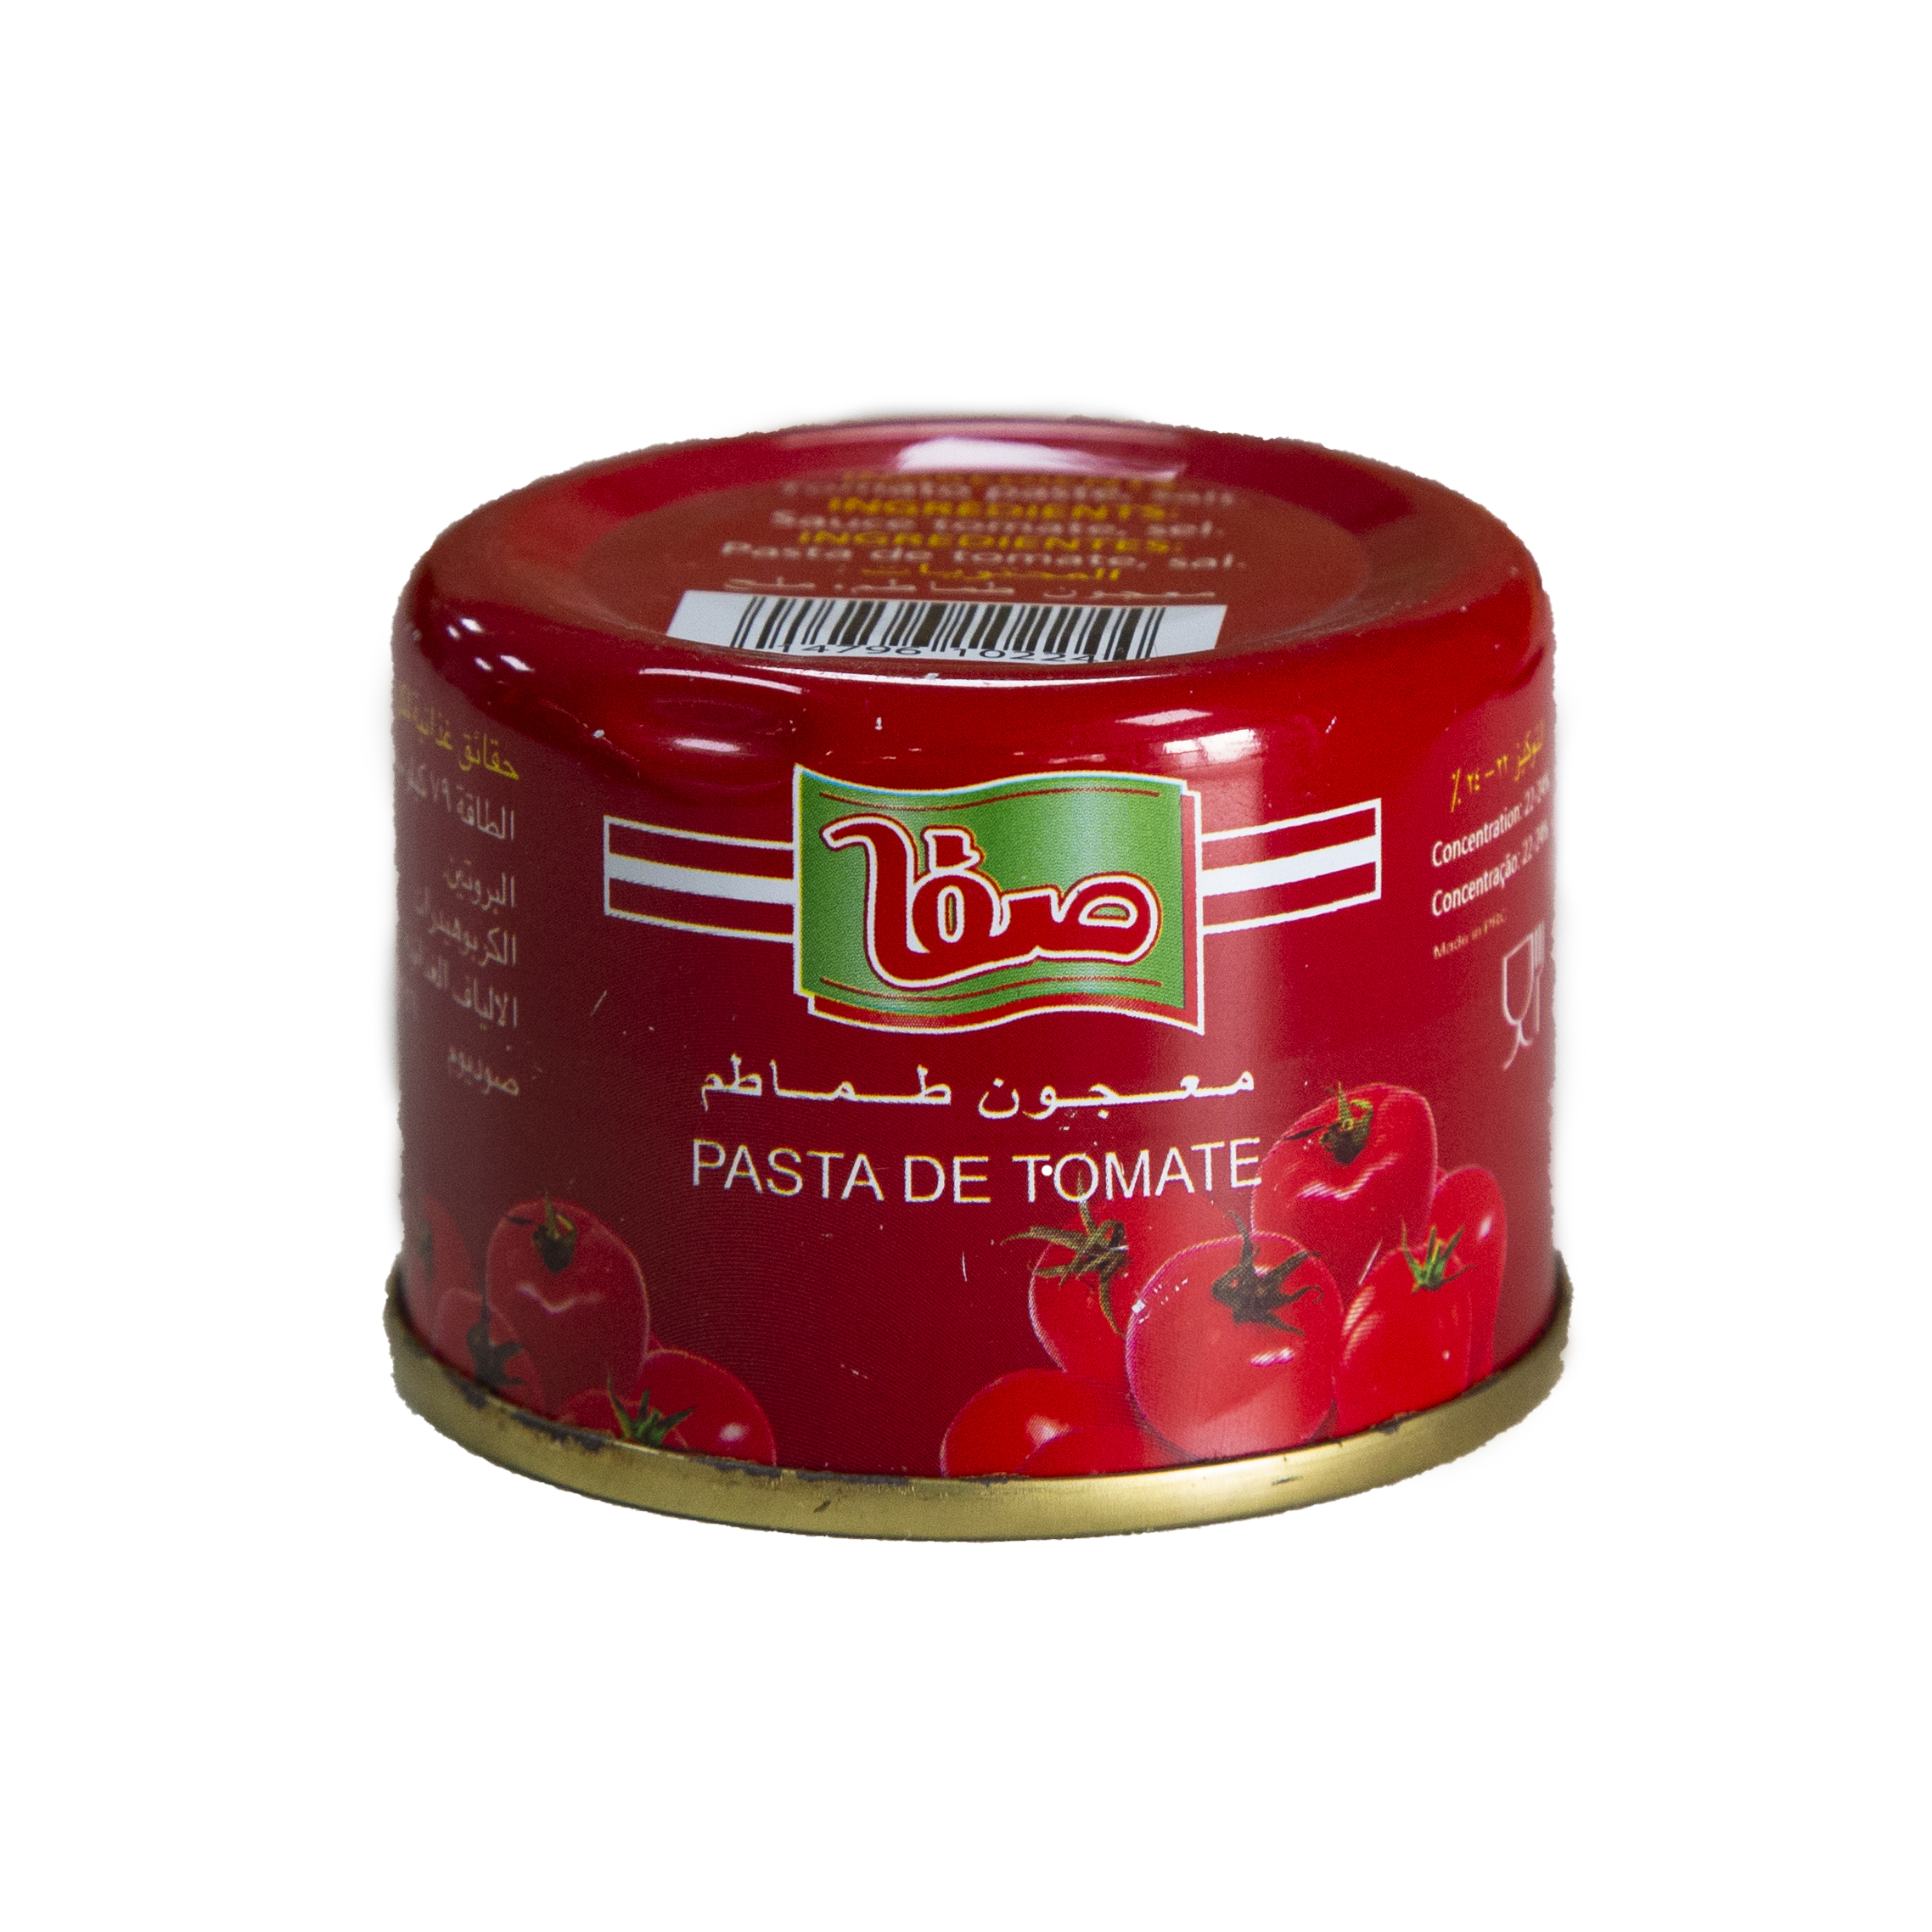 Canned tomato paste 70g organic material free label design